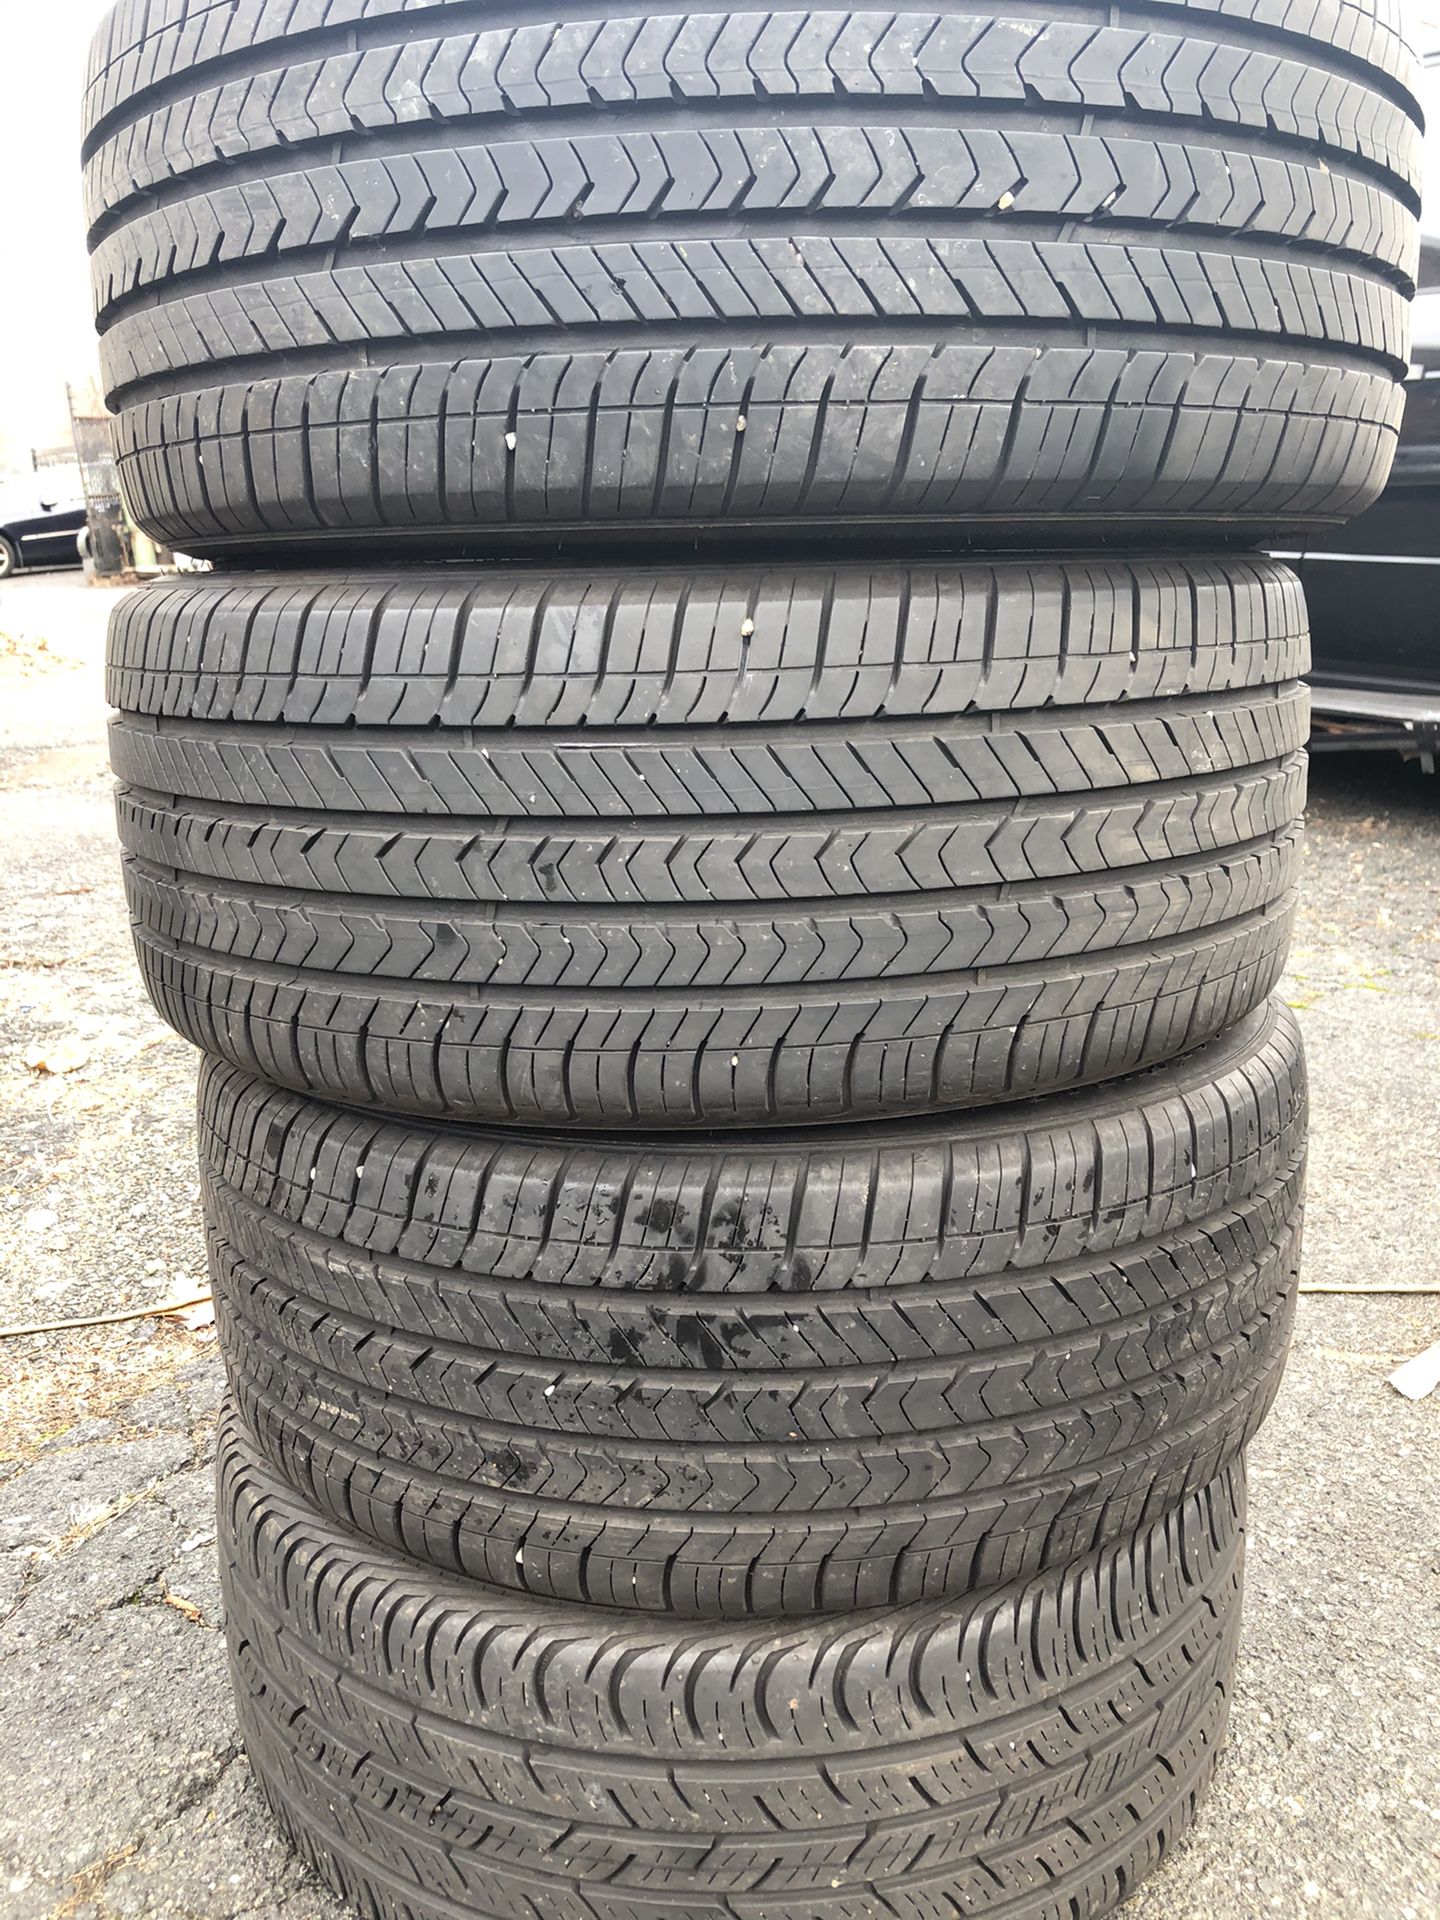 Set 4 usted tire 235/40R18 three Goodyear and one Continental one have patch set 4 usted tire $140